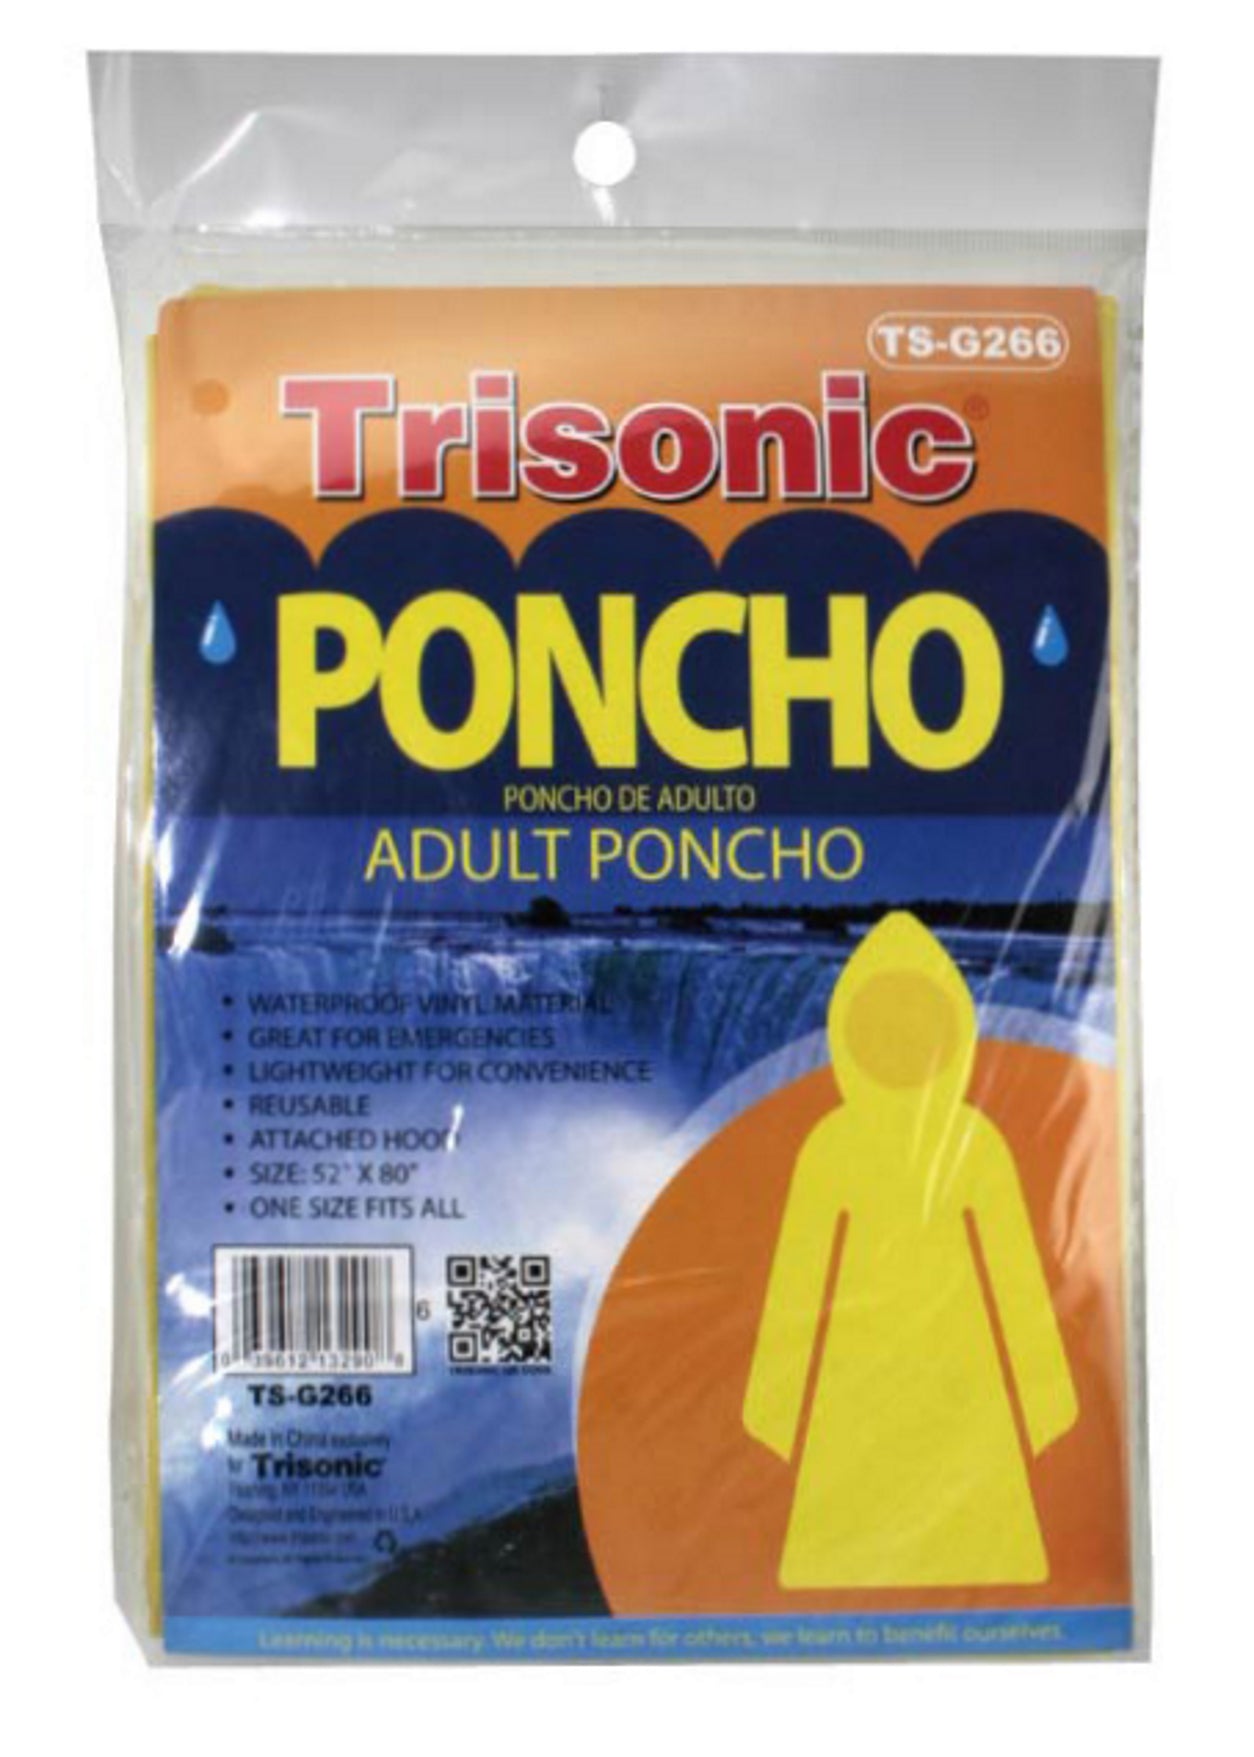 Adult Poncho Unisex Waterproof Disposable Lightweight and Reusable for Rain